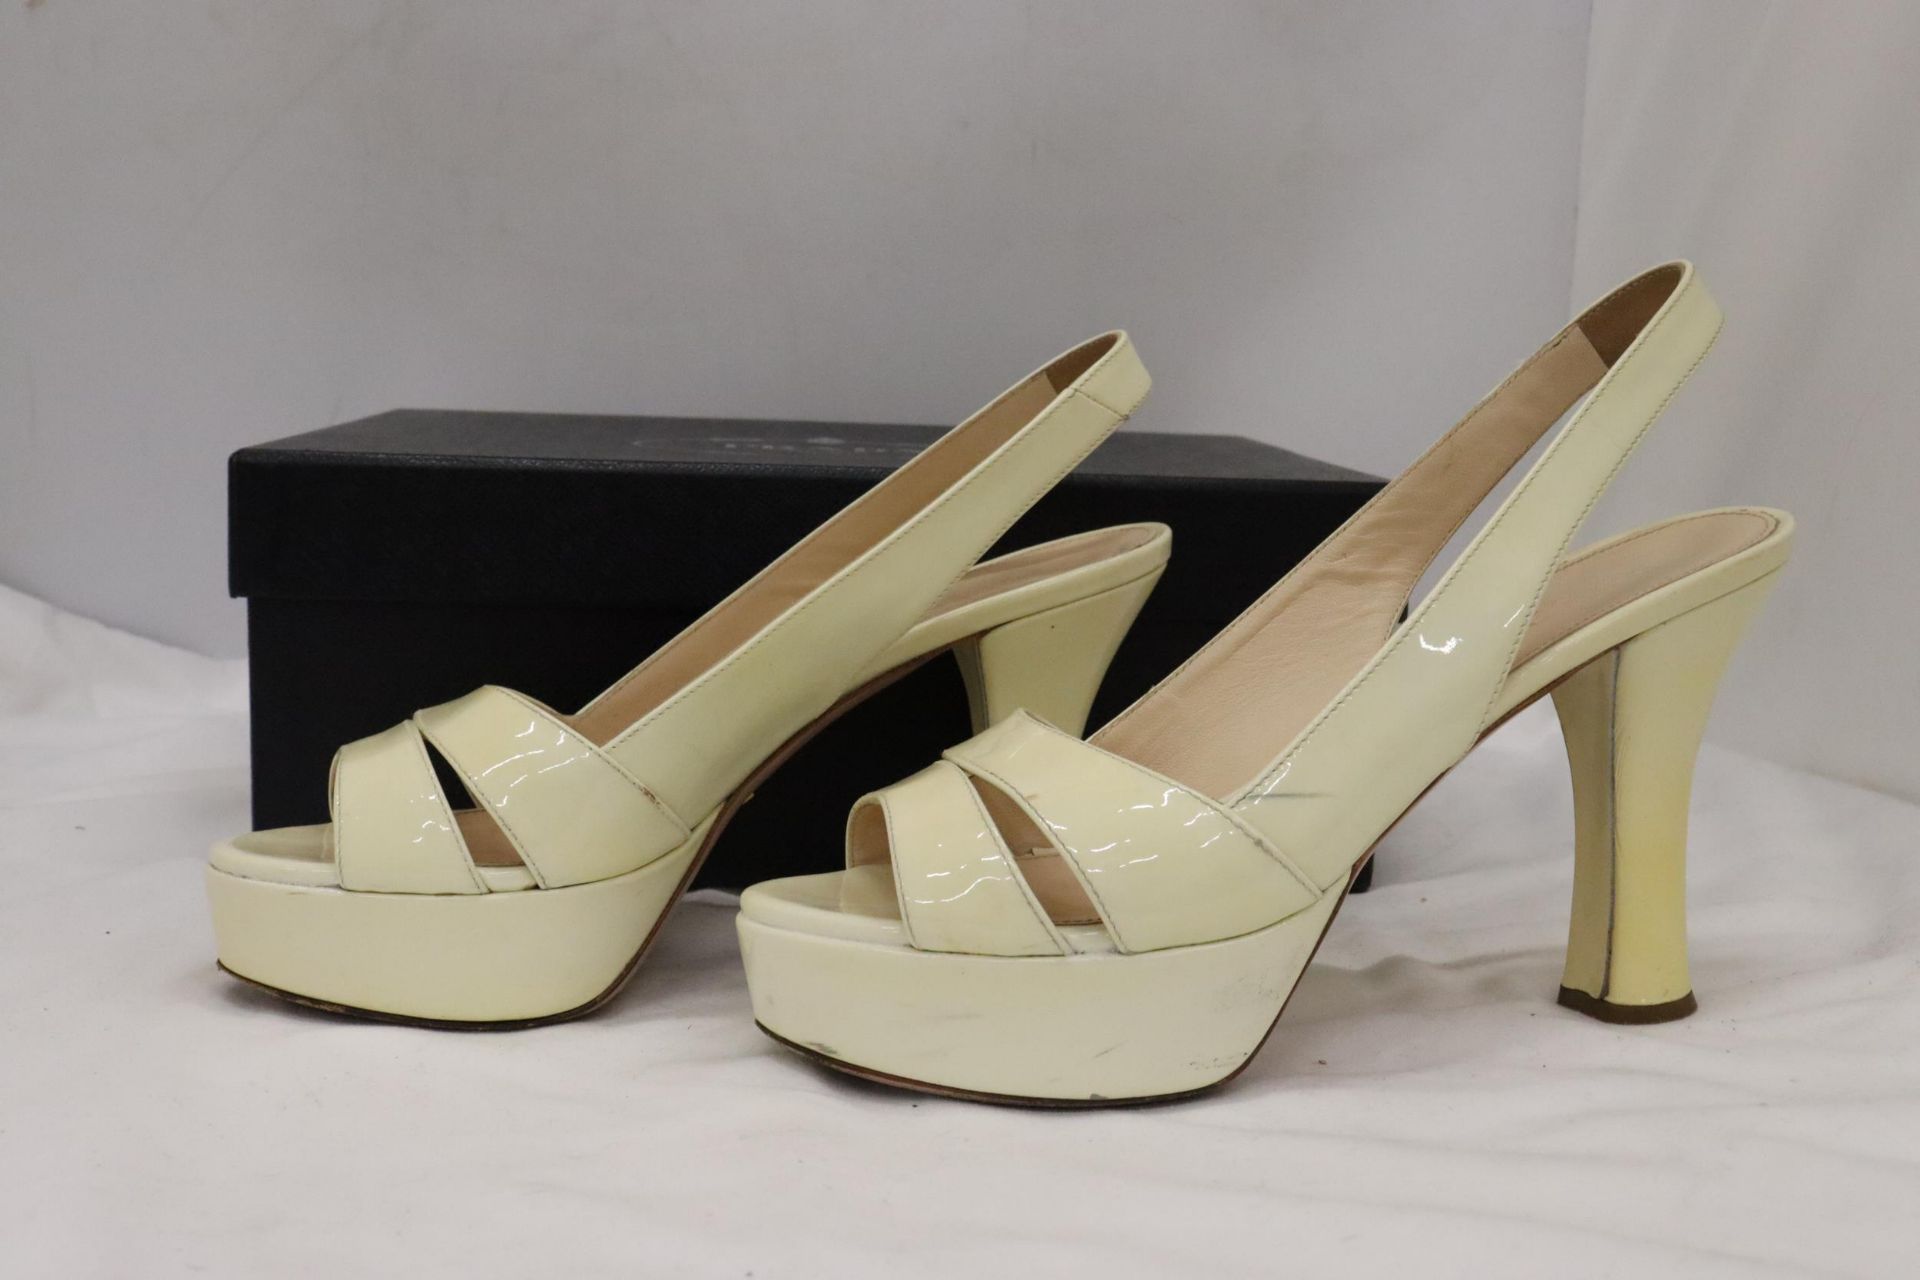 A PAIR OF CREAM HIGH HEELED SHOES, MARKED WITH A GOLD COLOURED 'PRADA' TO THE UNDERSIDE, IN A BOX - Image 3 of 7